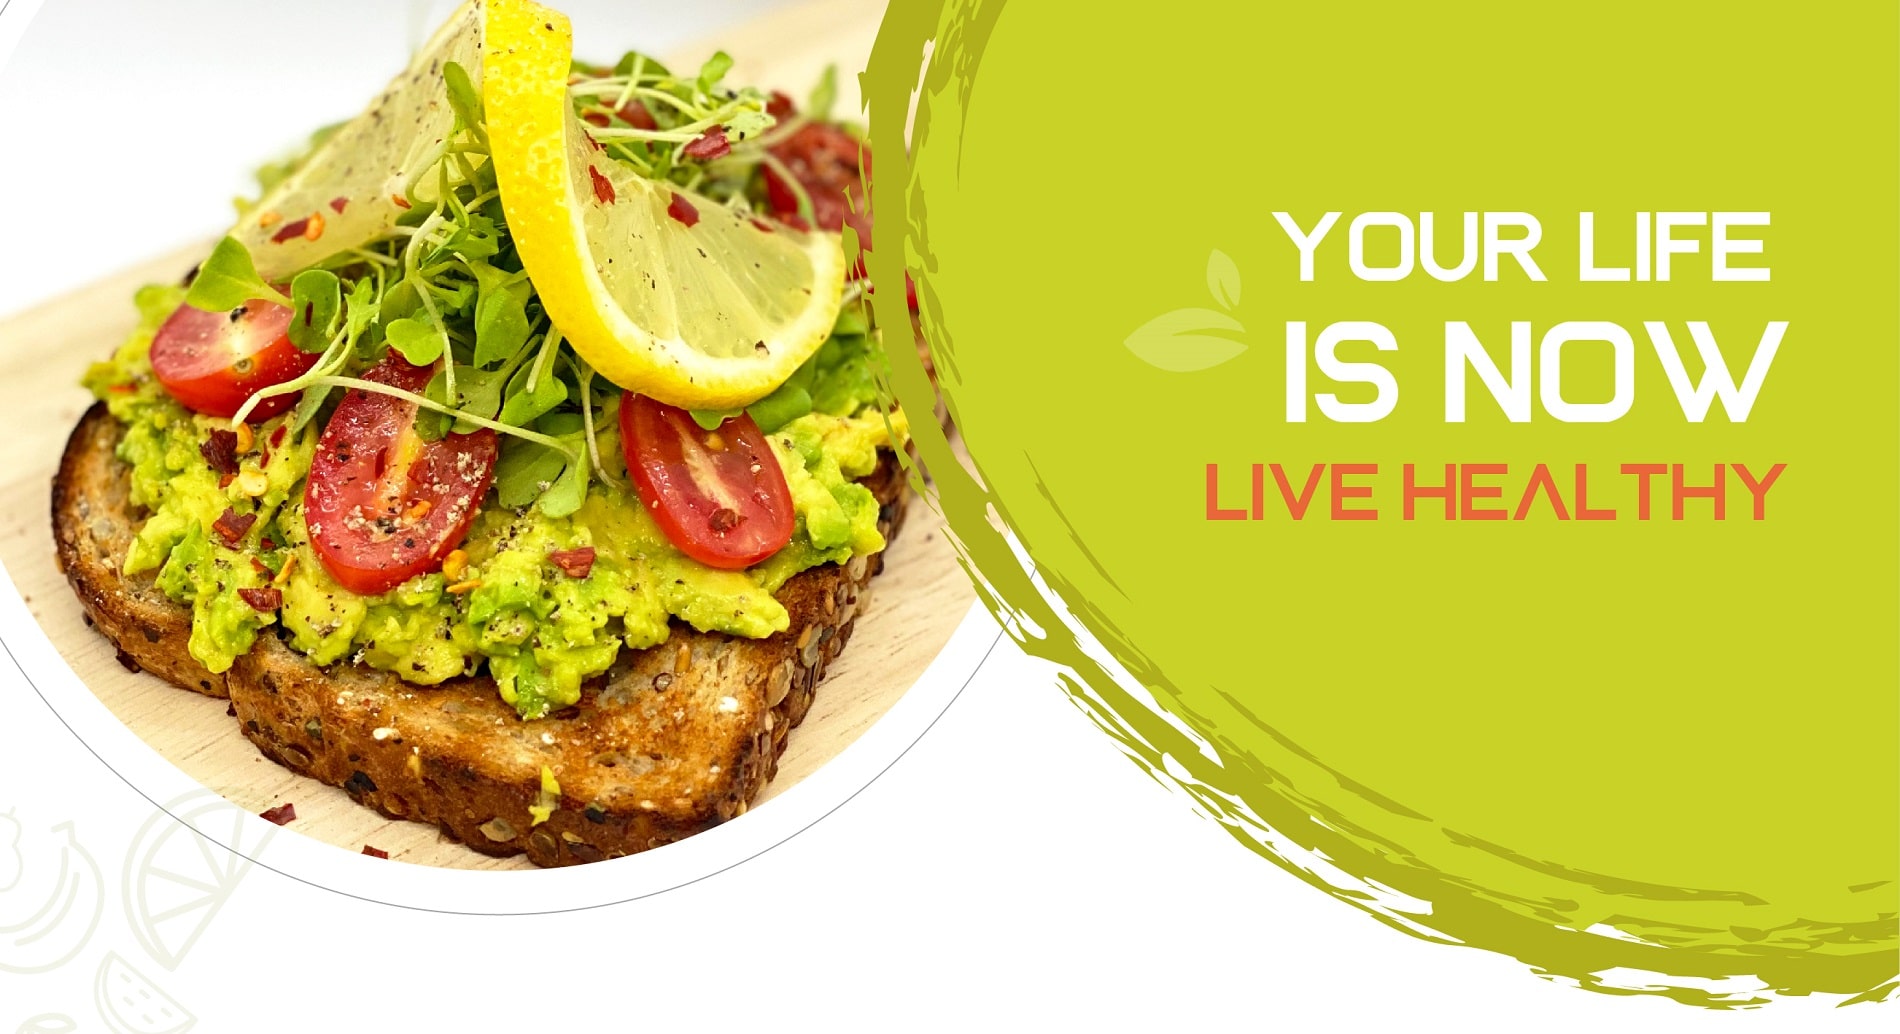 YOUR LIVE IS NOW. LIVE HEALTHY